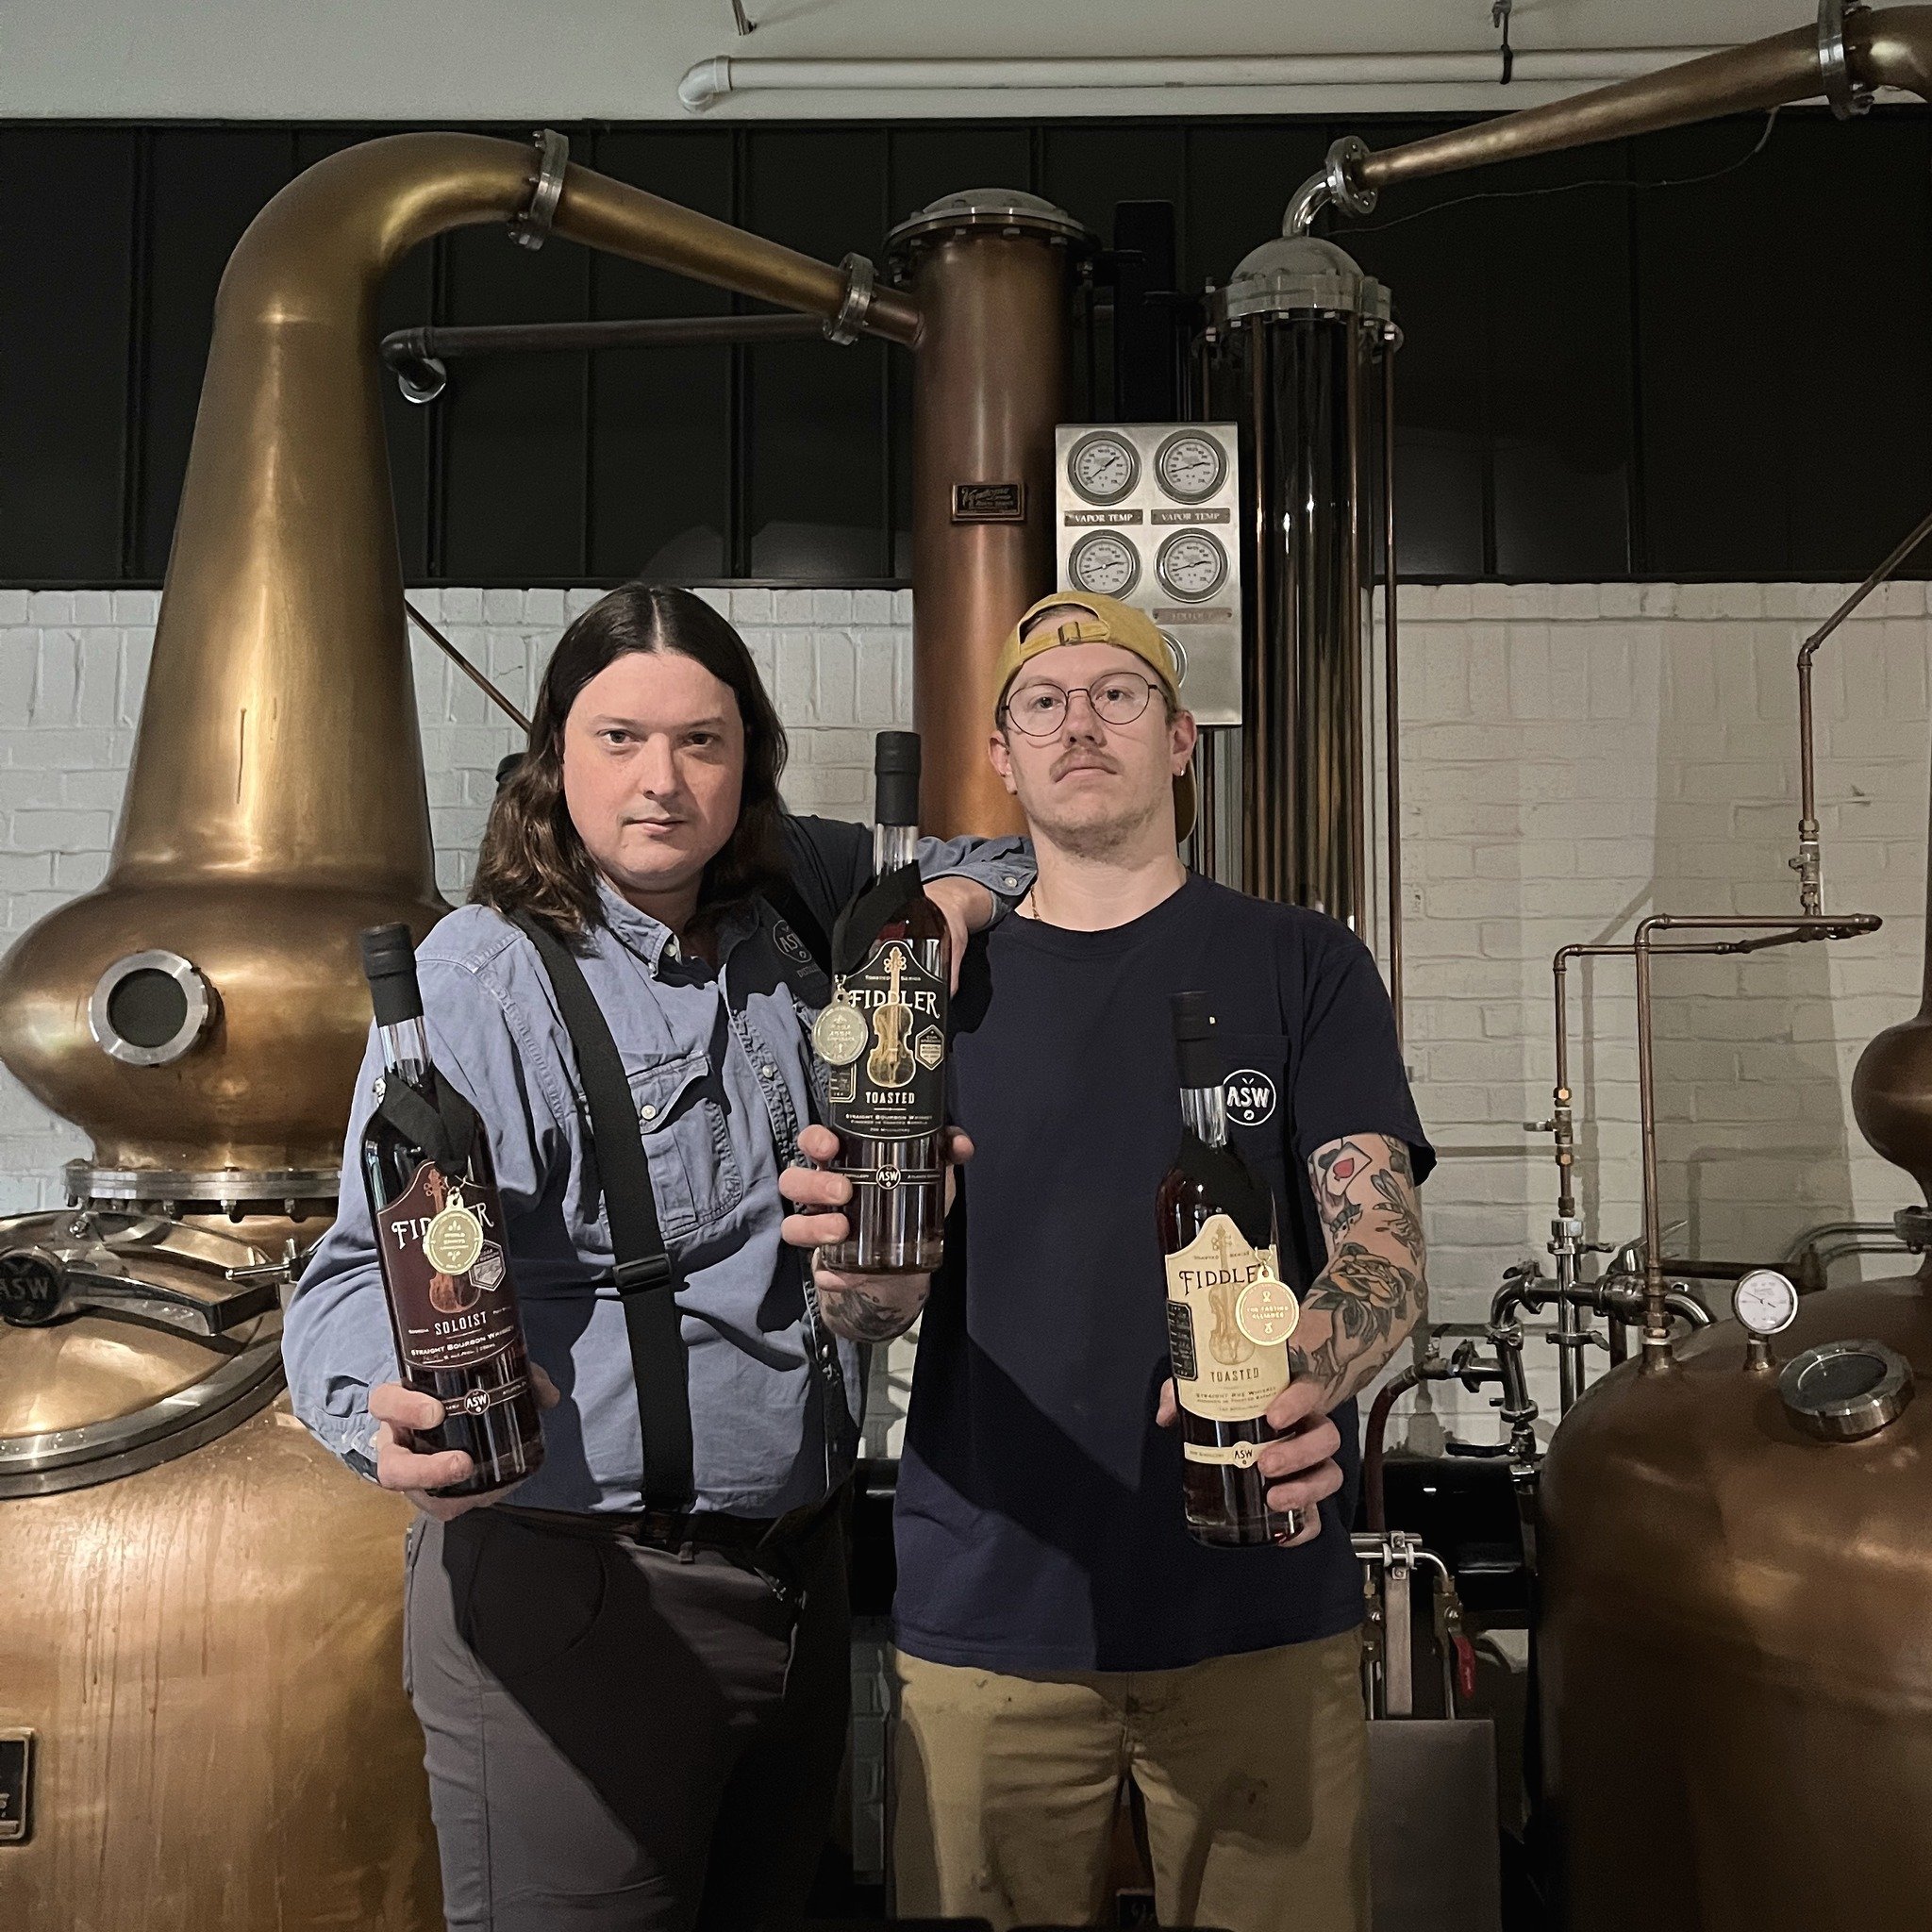 We're excited to announce that four Fiddlers added to their Gold Medal count at this year's @sfwspiritscomp : Fiddler Soloist, Fiddler Toasted Bourbon, Fiddler Toasted Rye, and accomplished fiddler and Master Distiller himself Justin Manglitz, who th